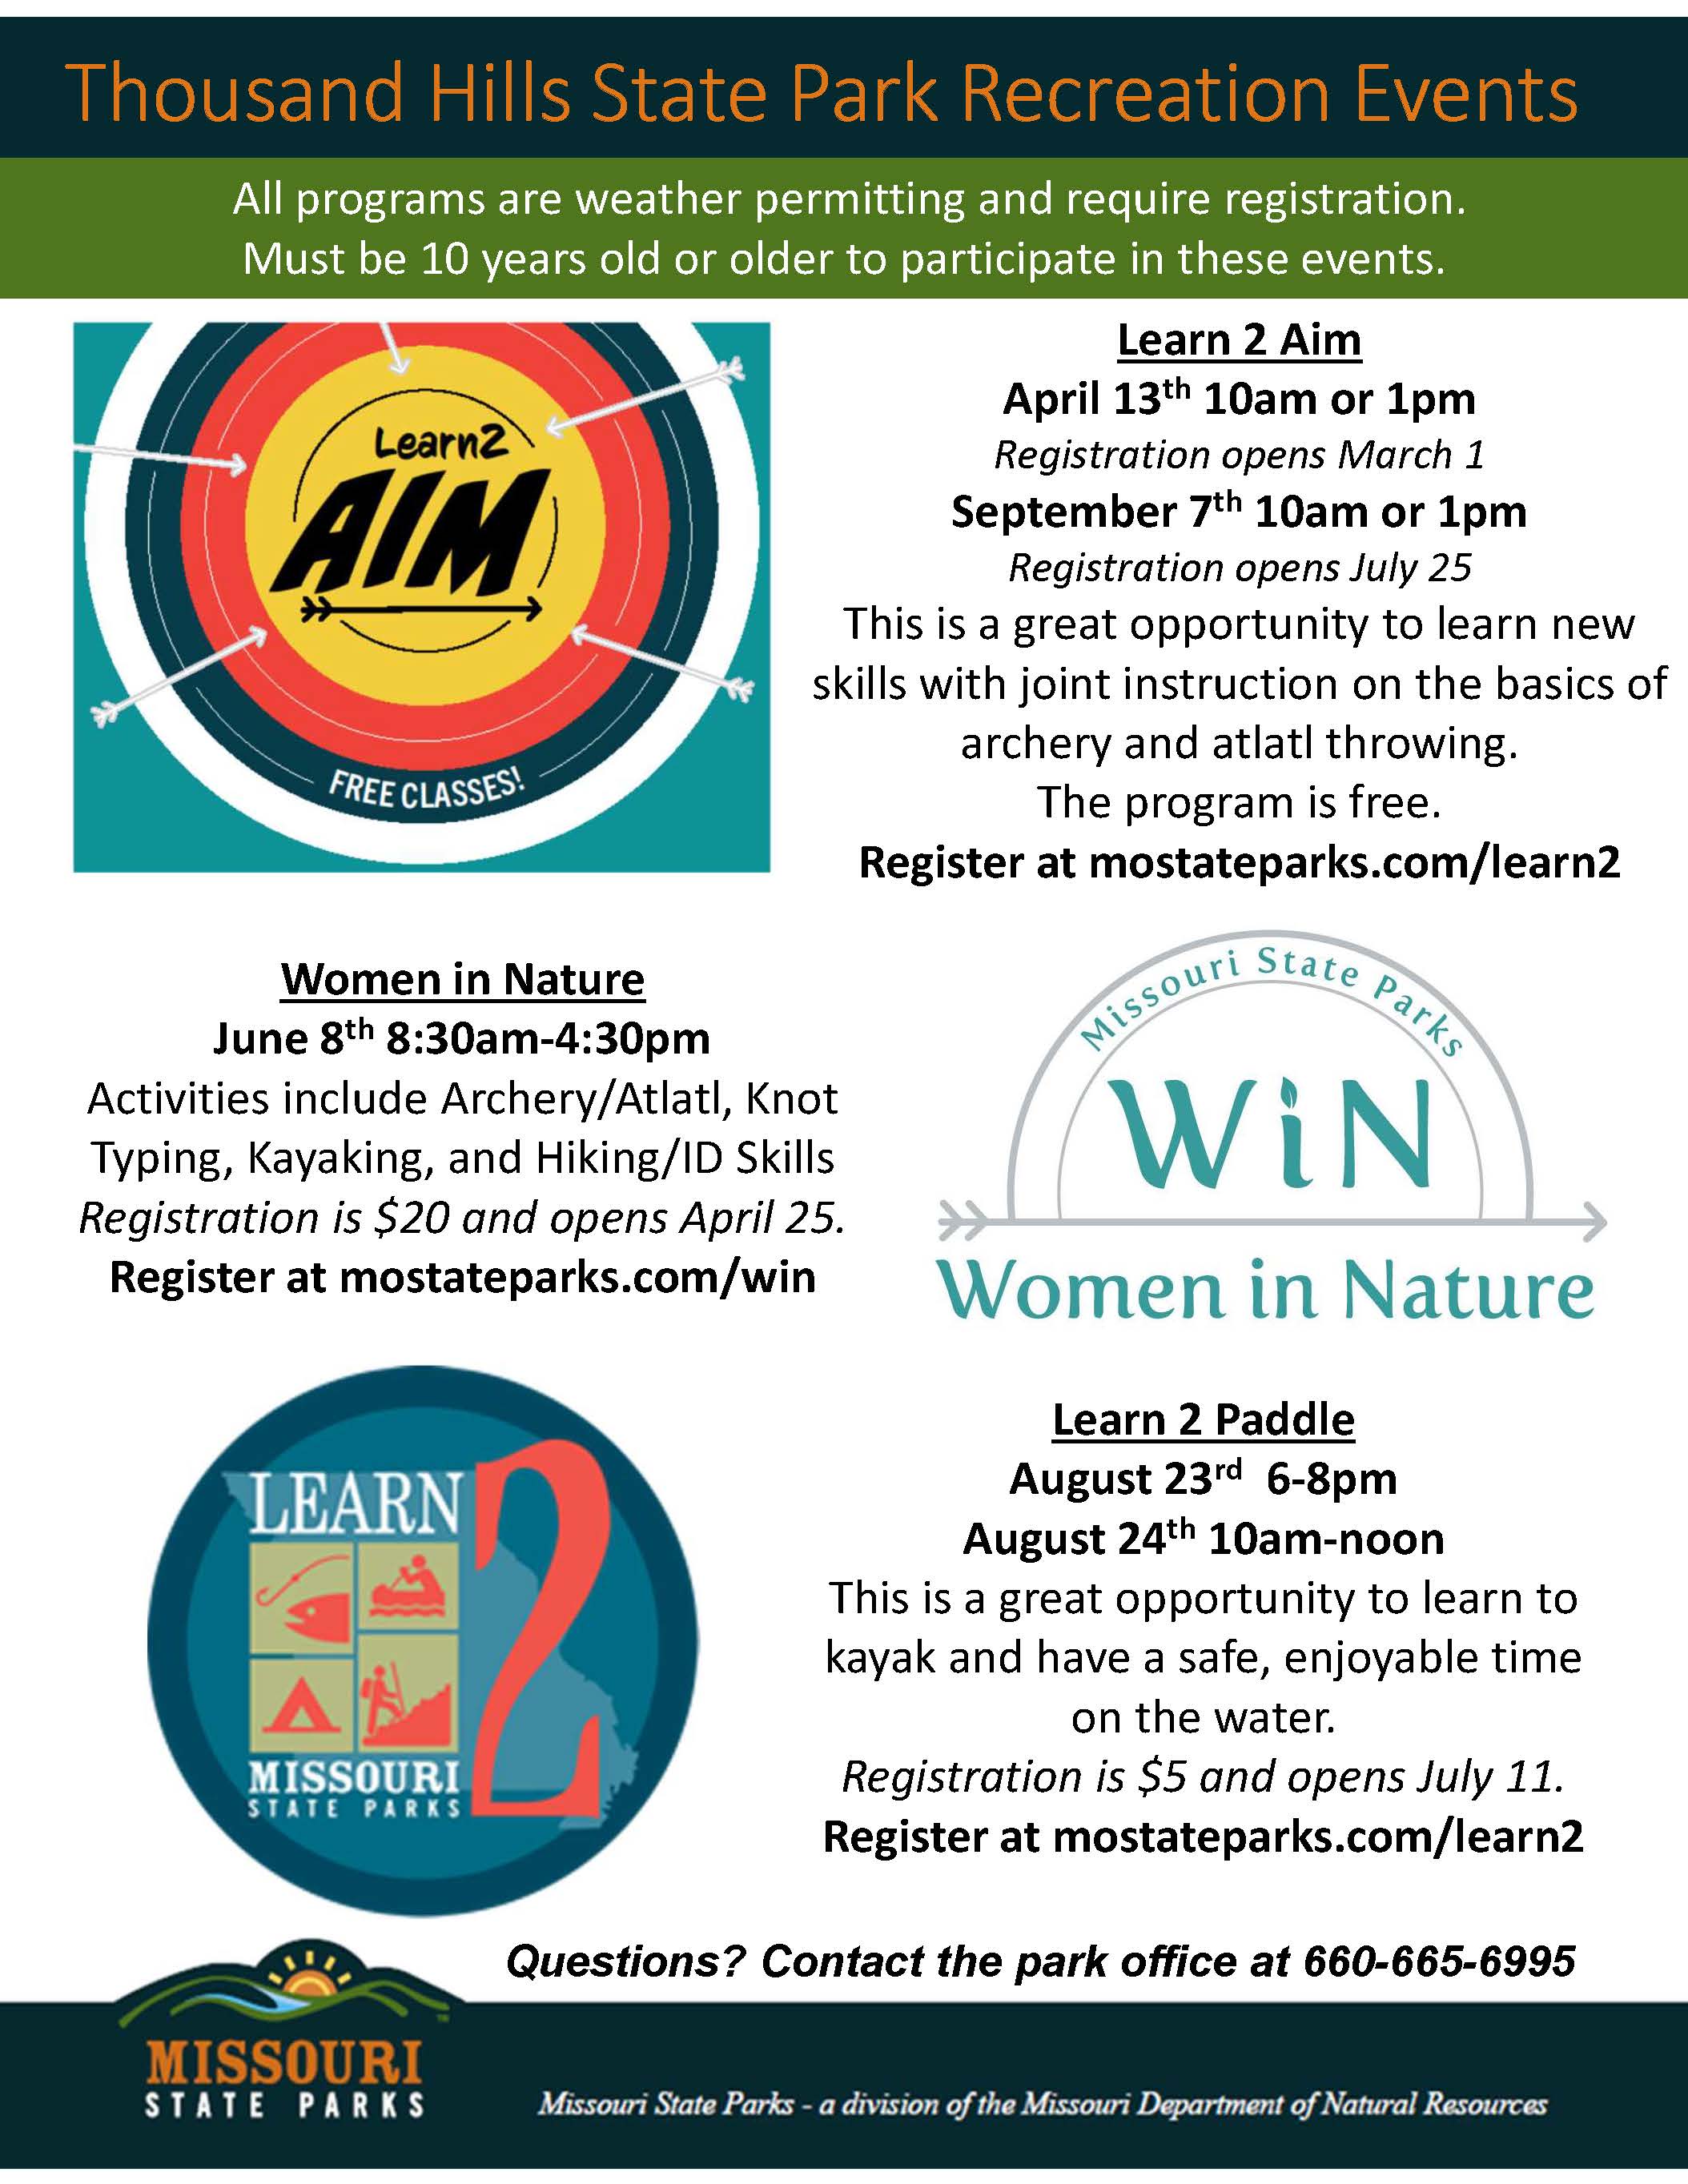 Check more about Women In Nature (WIN)